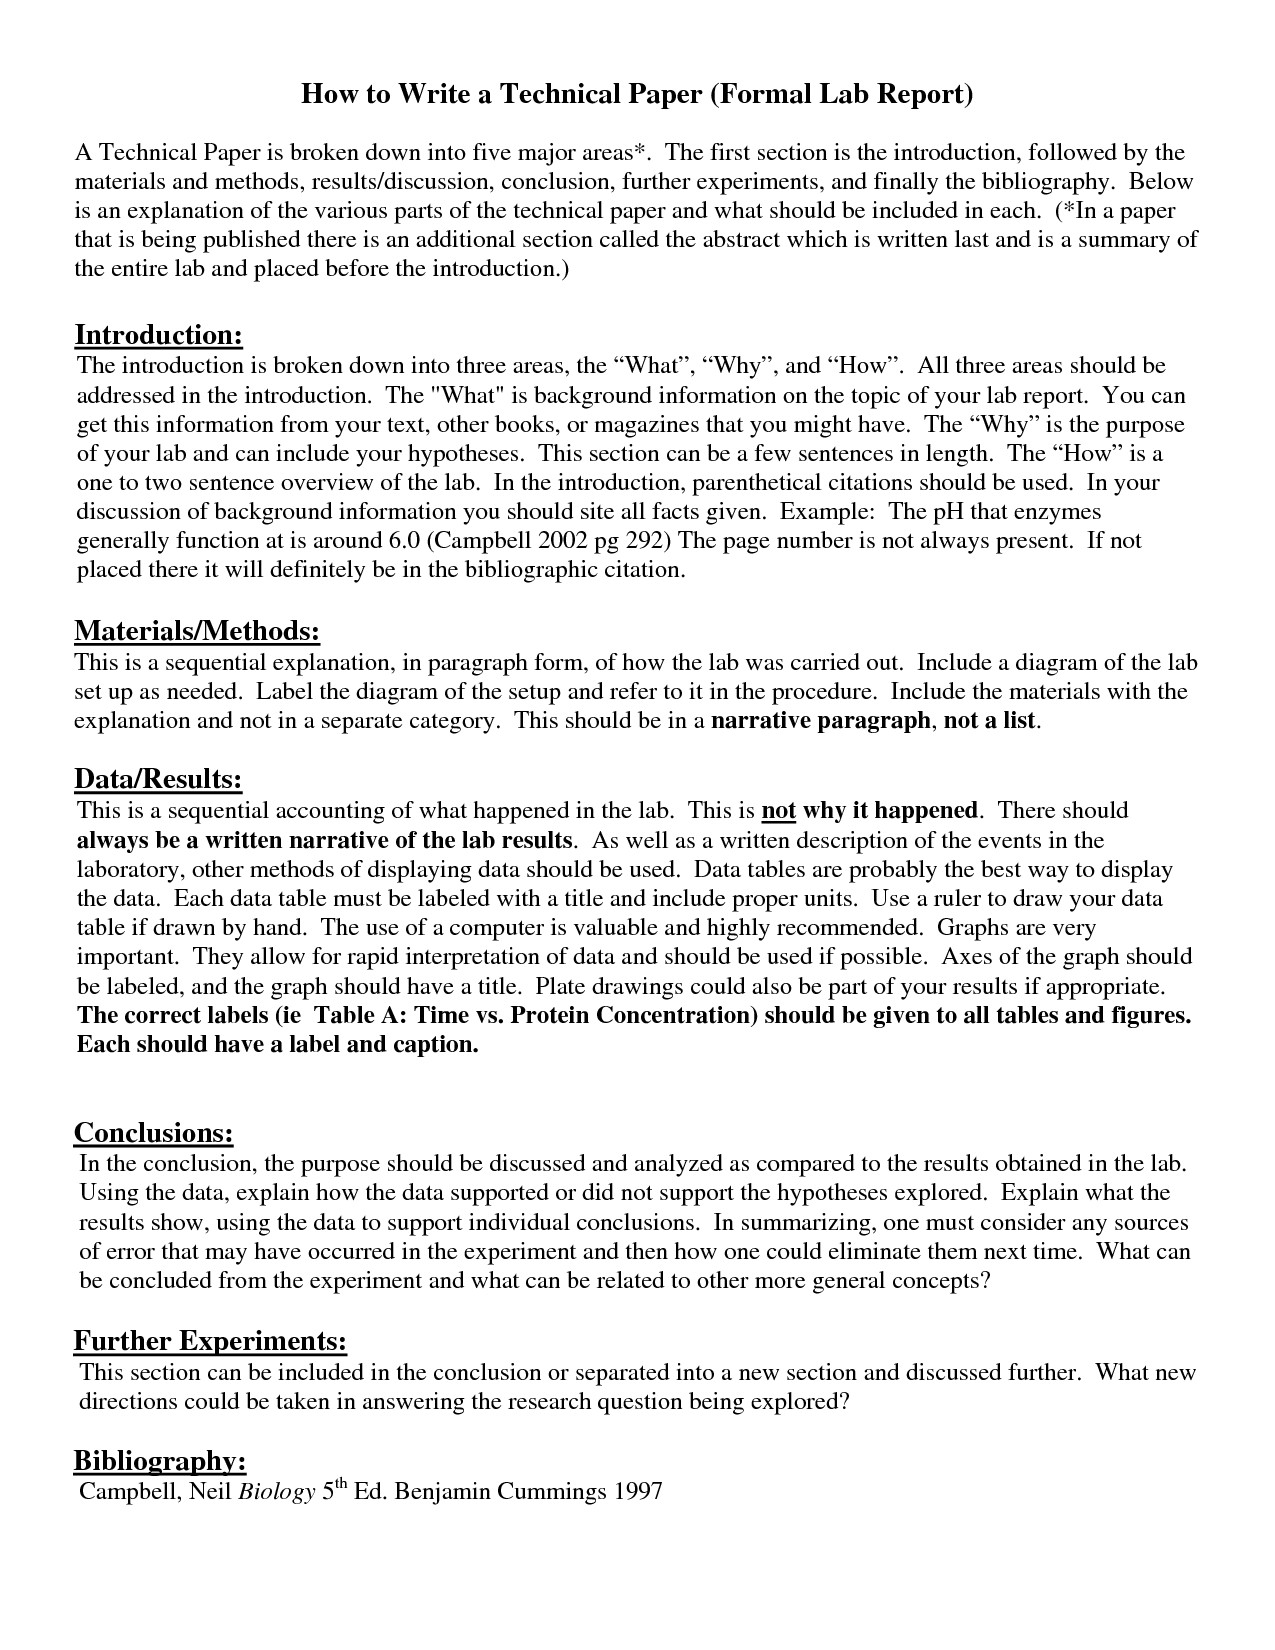 Formal Lab Report Template formal Lab Report Biological Science Picture Directory